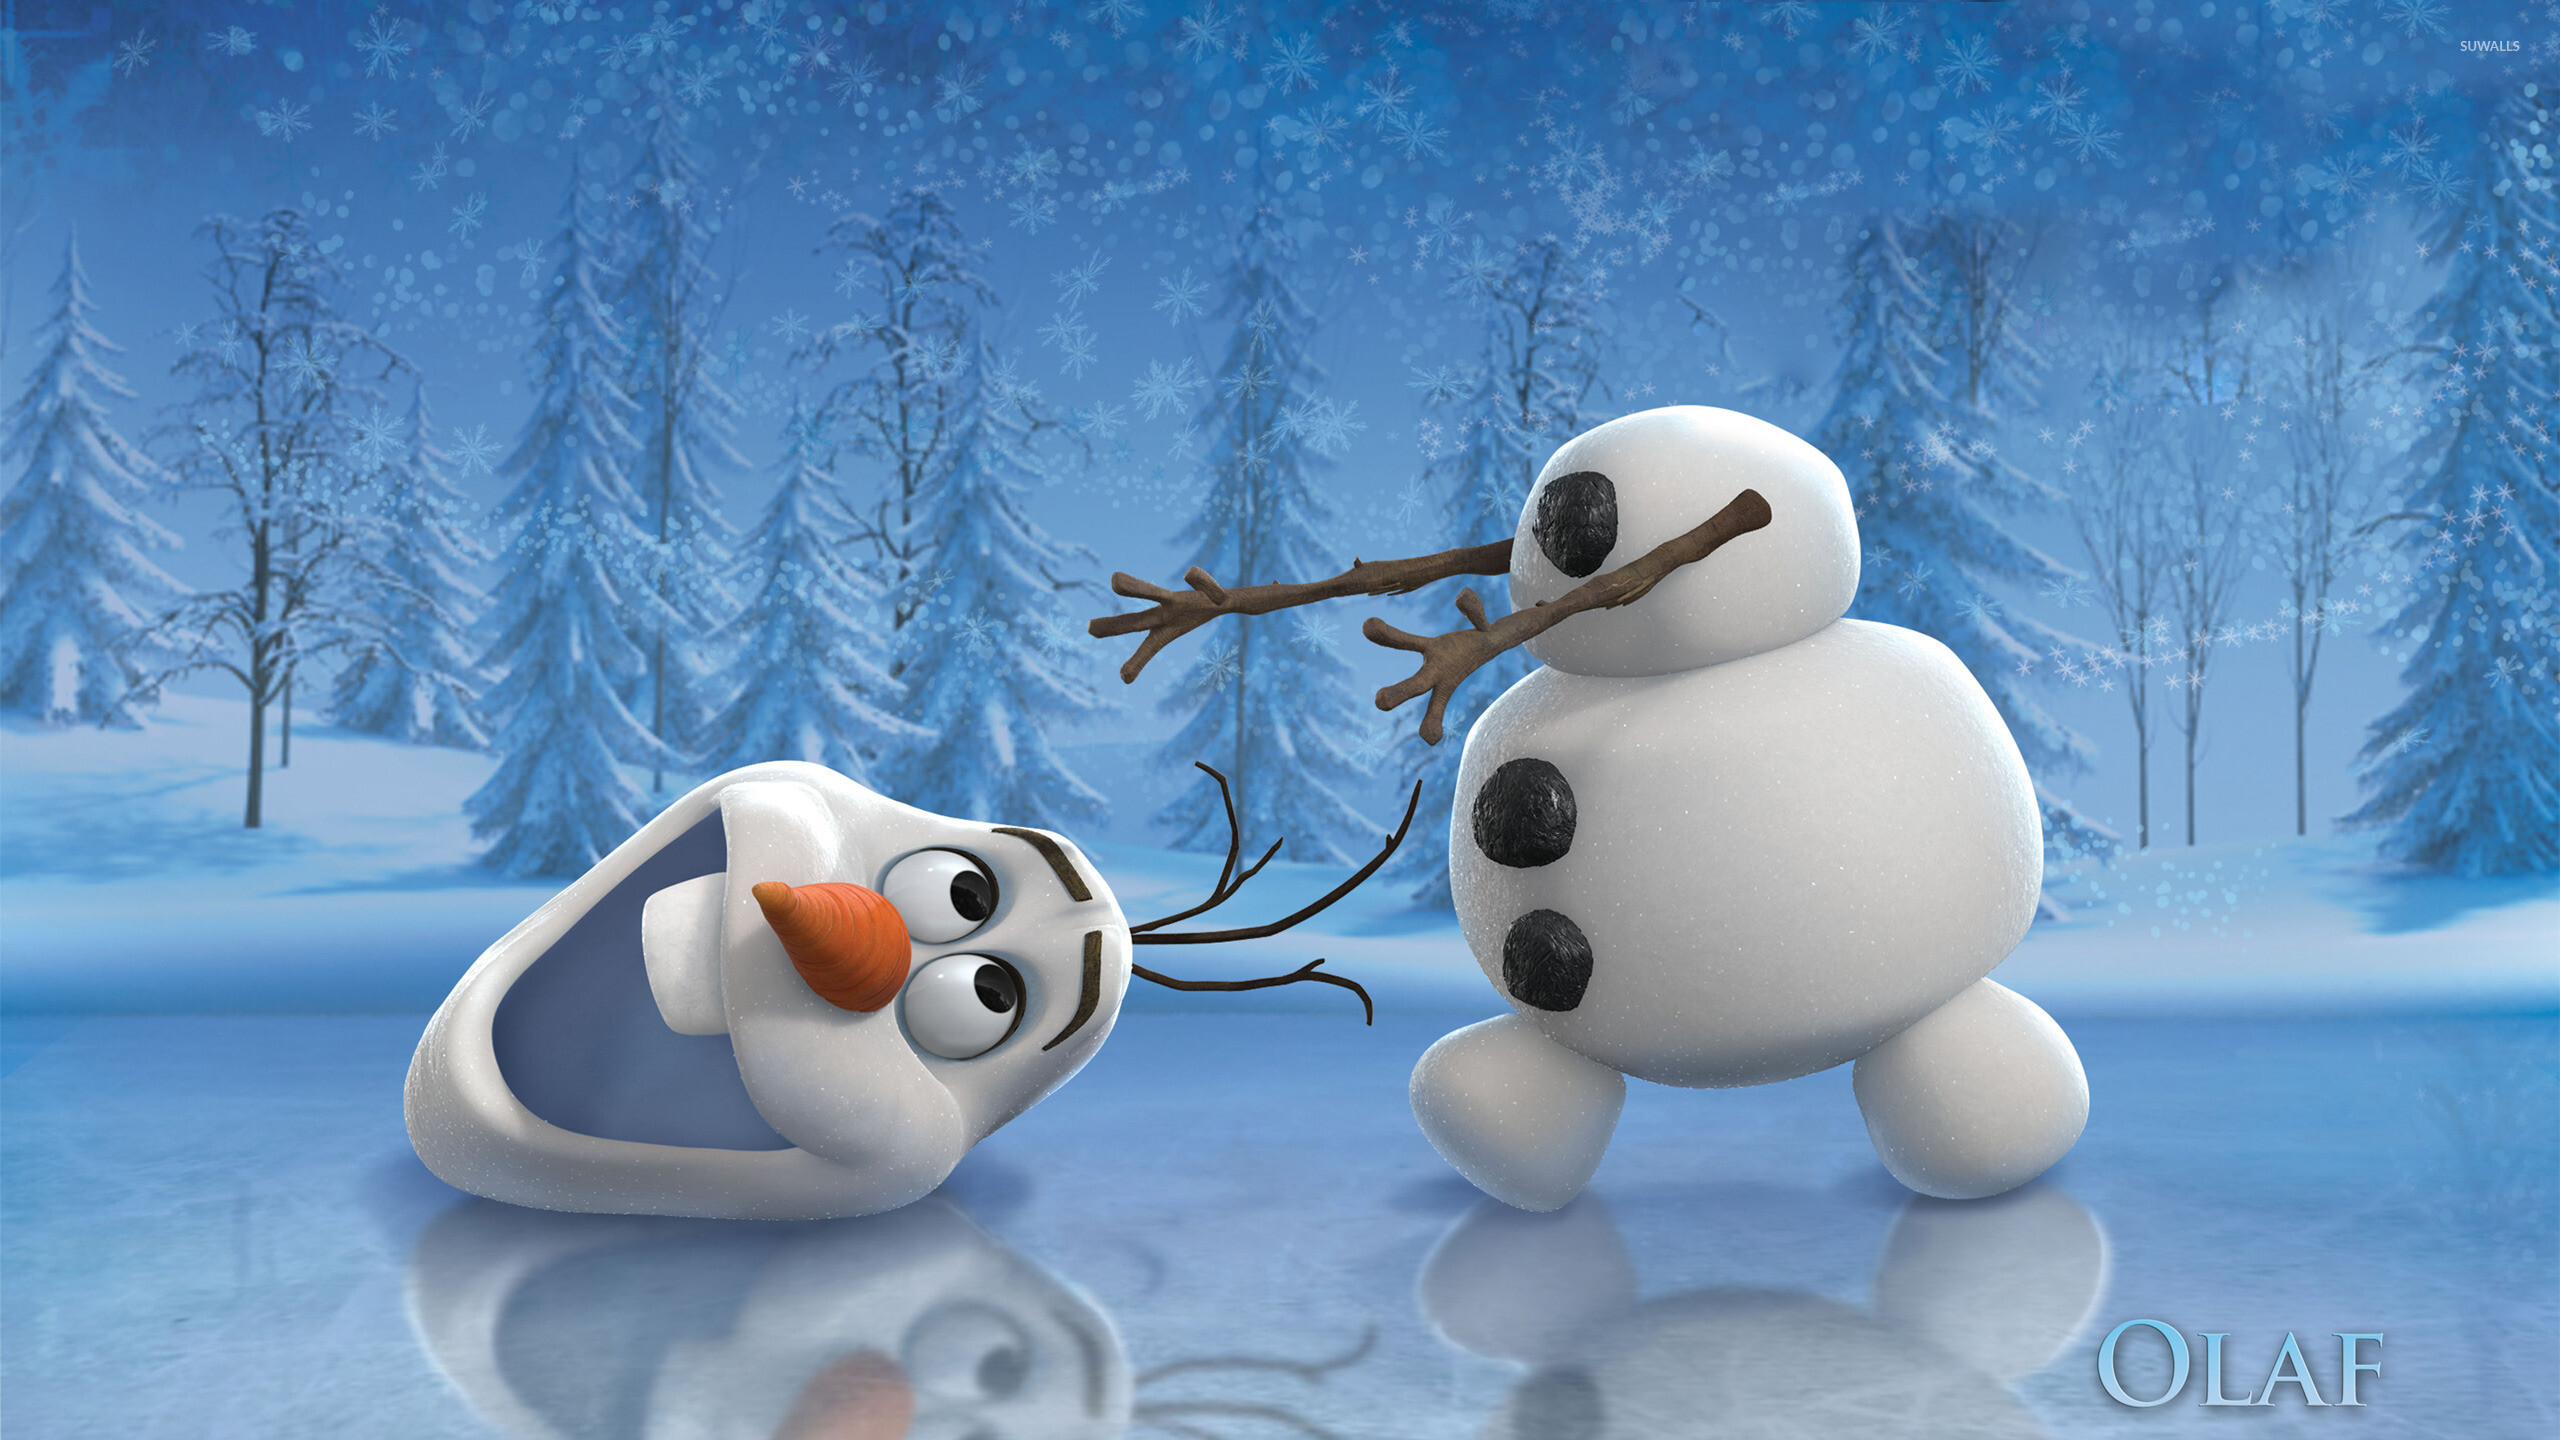 Frozen: As a snowman Anna and Elsa built together as kids, Olaf represents innocent love and the joy the sisters once had when they were young before being split. 2560x1440 HD Wallpaper.